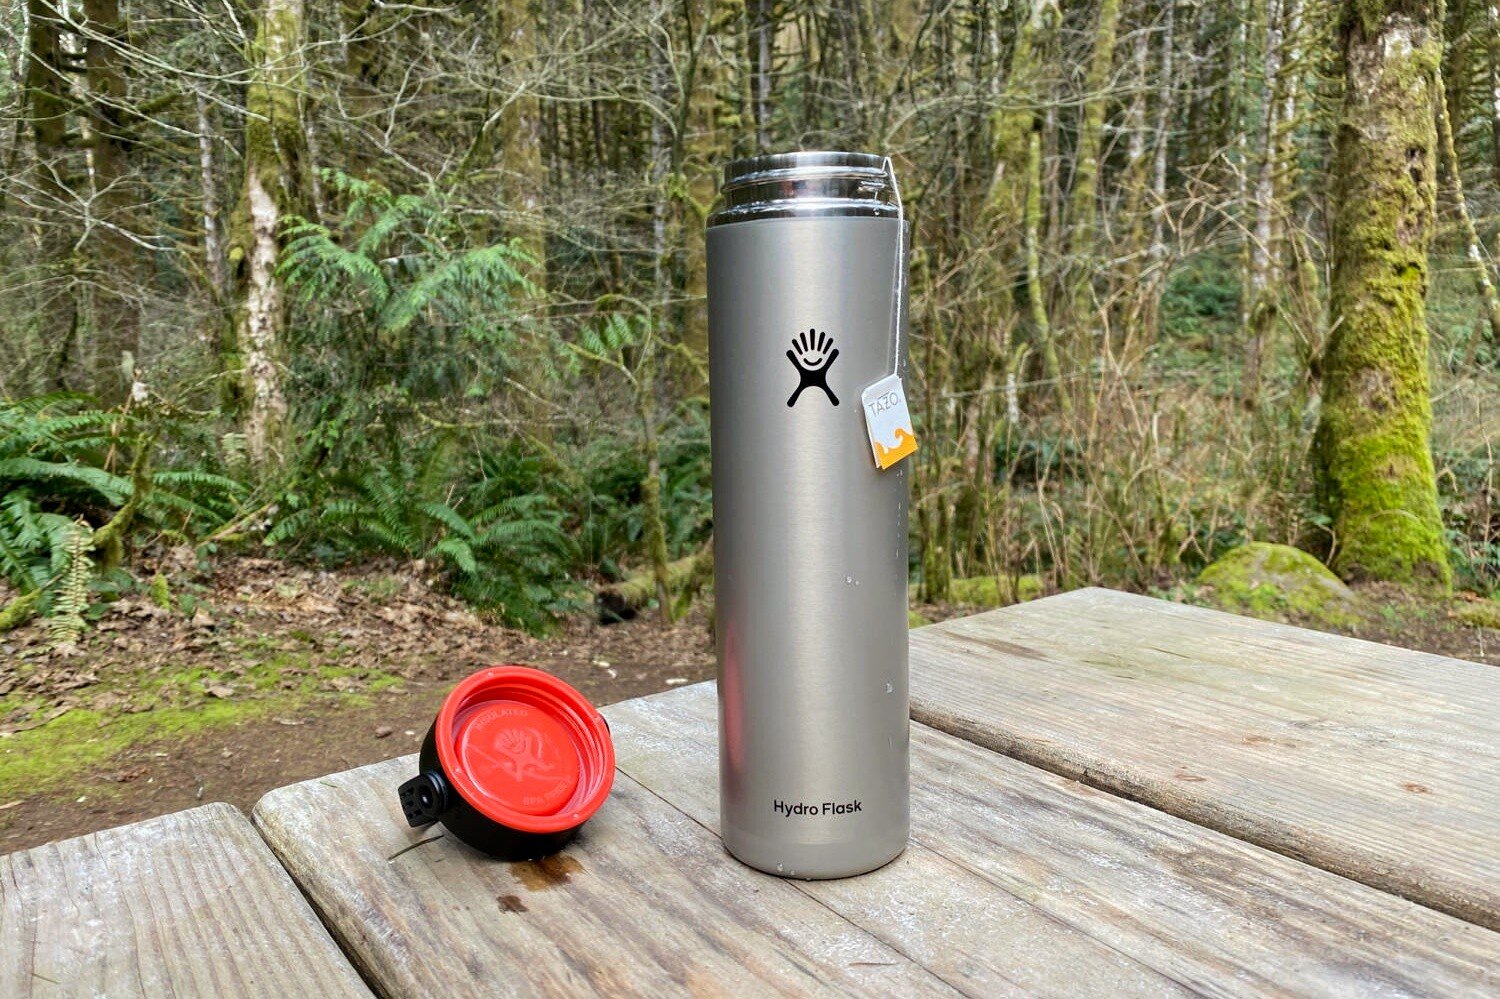 https://www.cleverhiker.com/wp-content/uploads/2020/05/Making-hot-tea-in-the-Hydro-Flask-Lightweight-Trail-Series-Wide-Mouth-Vacuum-Insulated-Water-Bottles-while-camping.jpeg